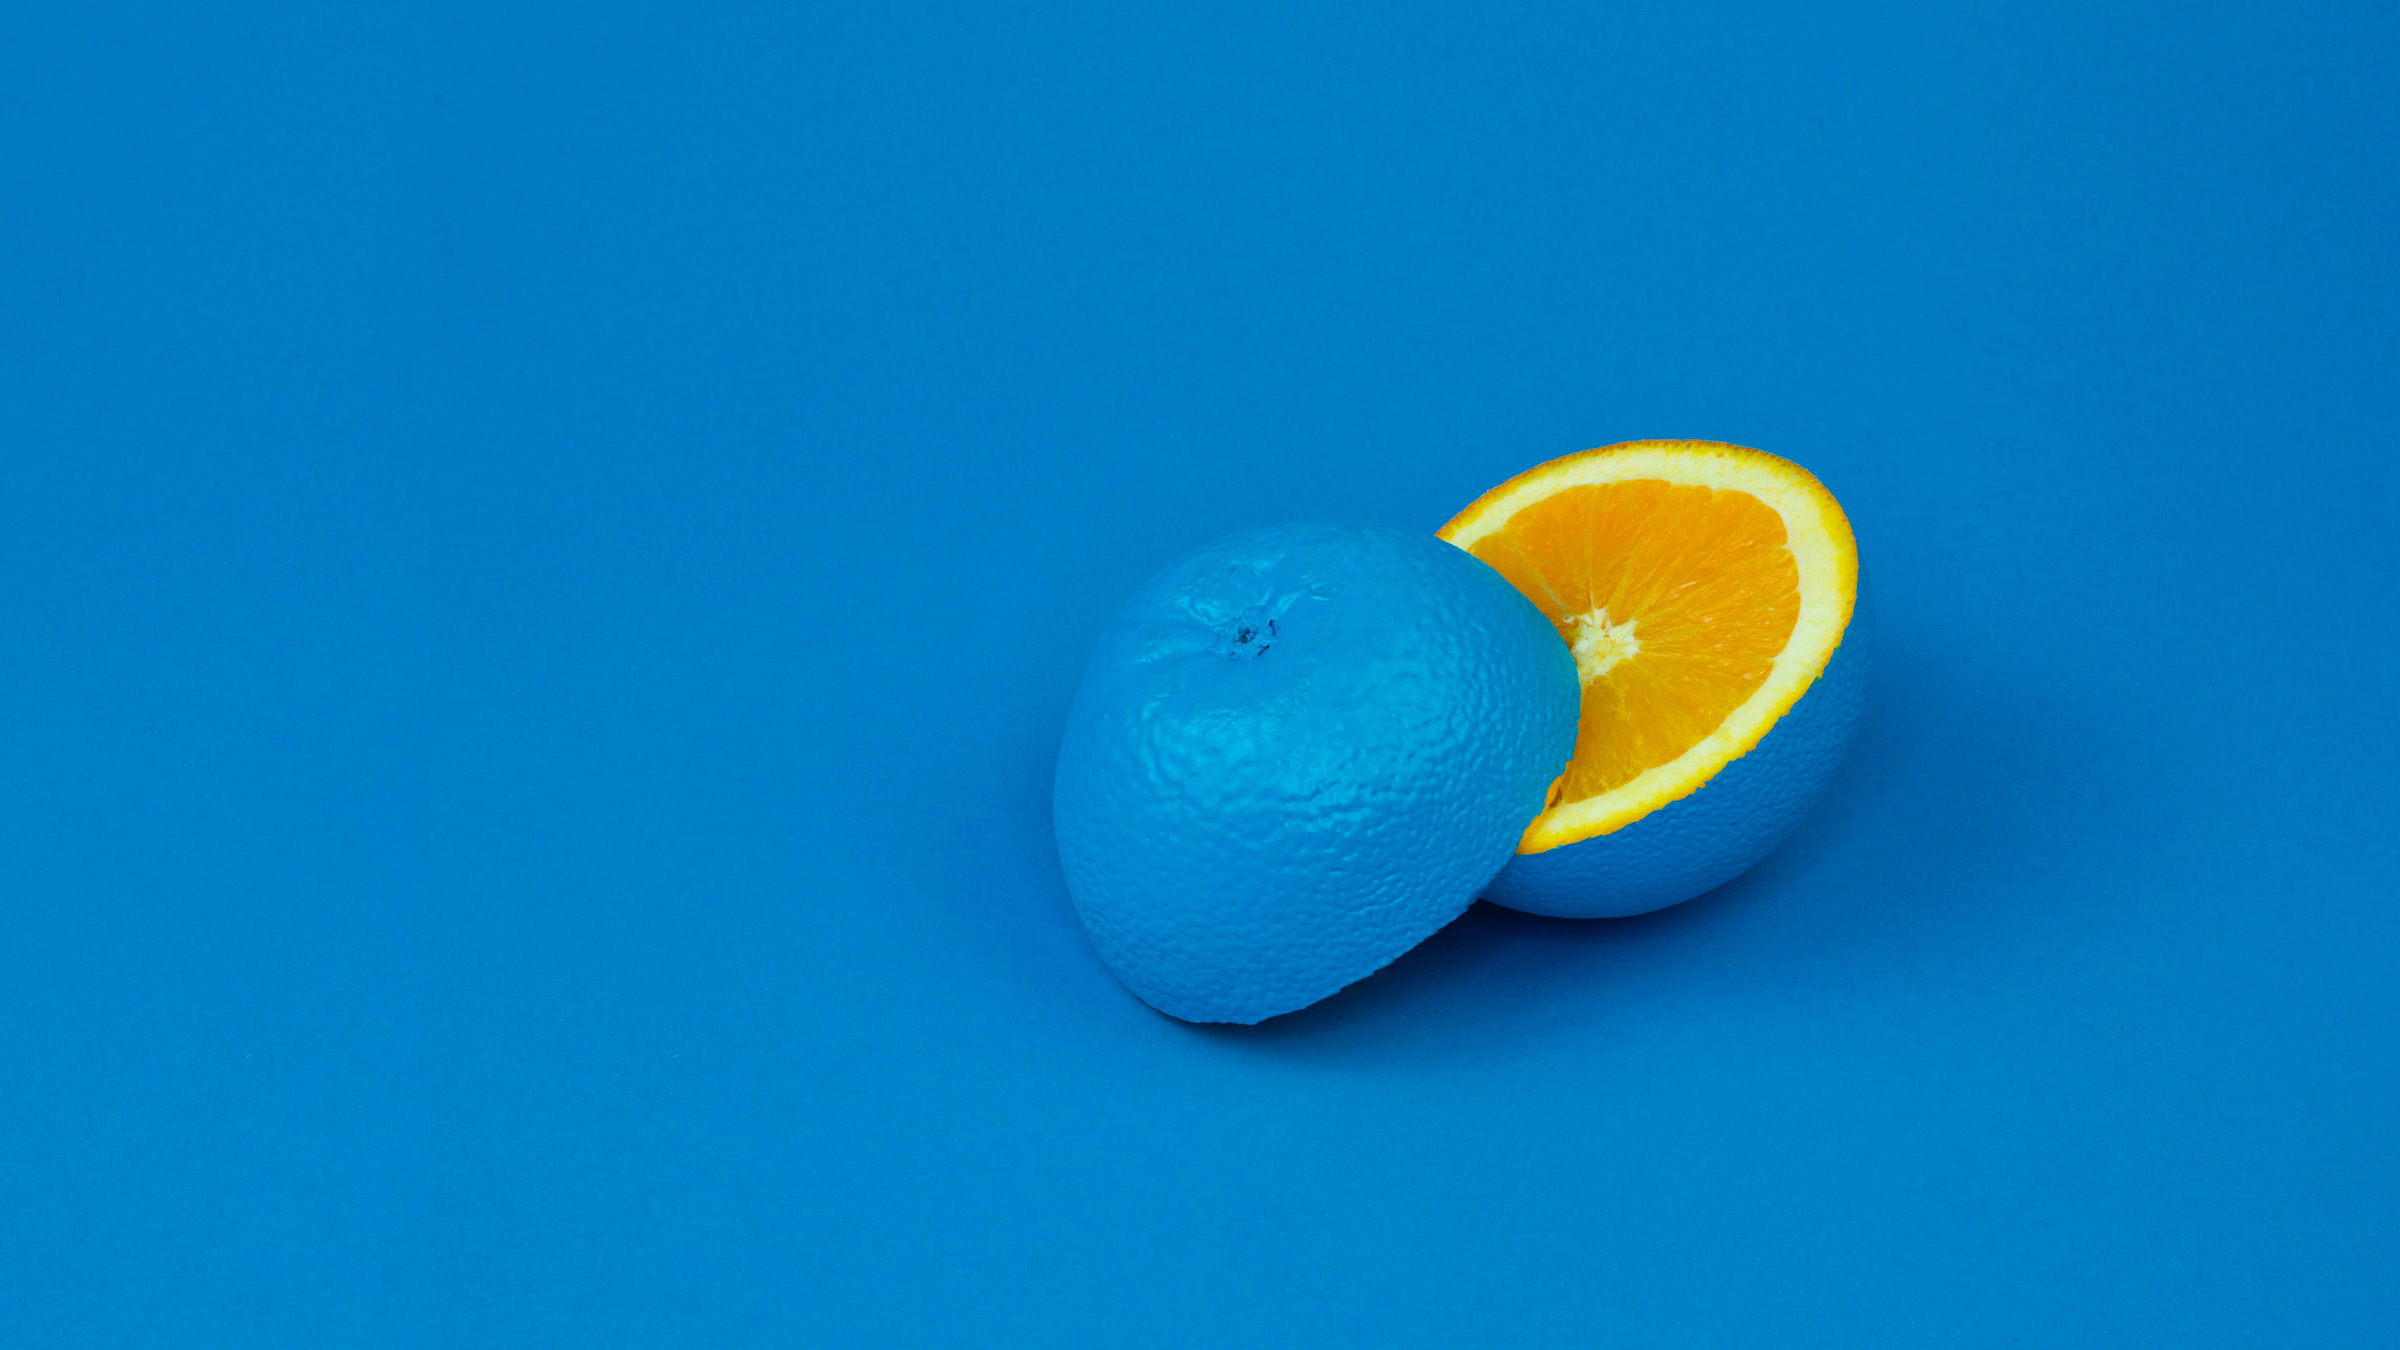 Blue paint camouflages an orange, indicating the importance of color in design accessibility